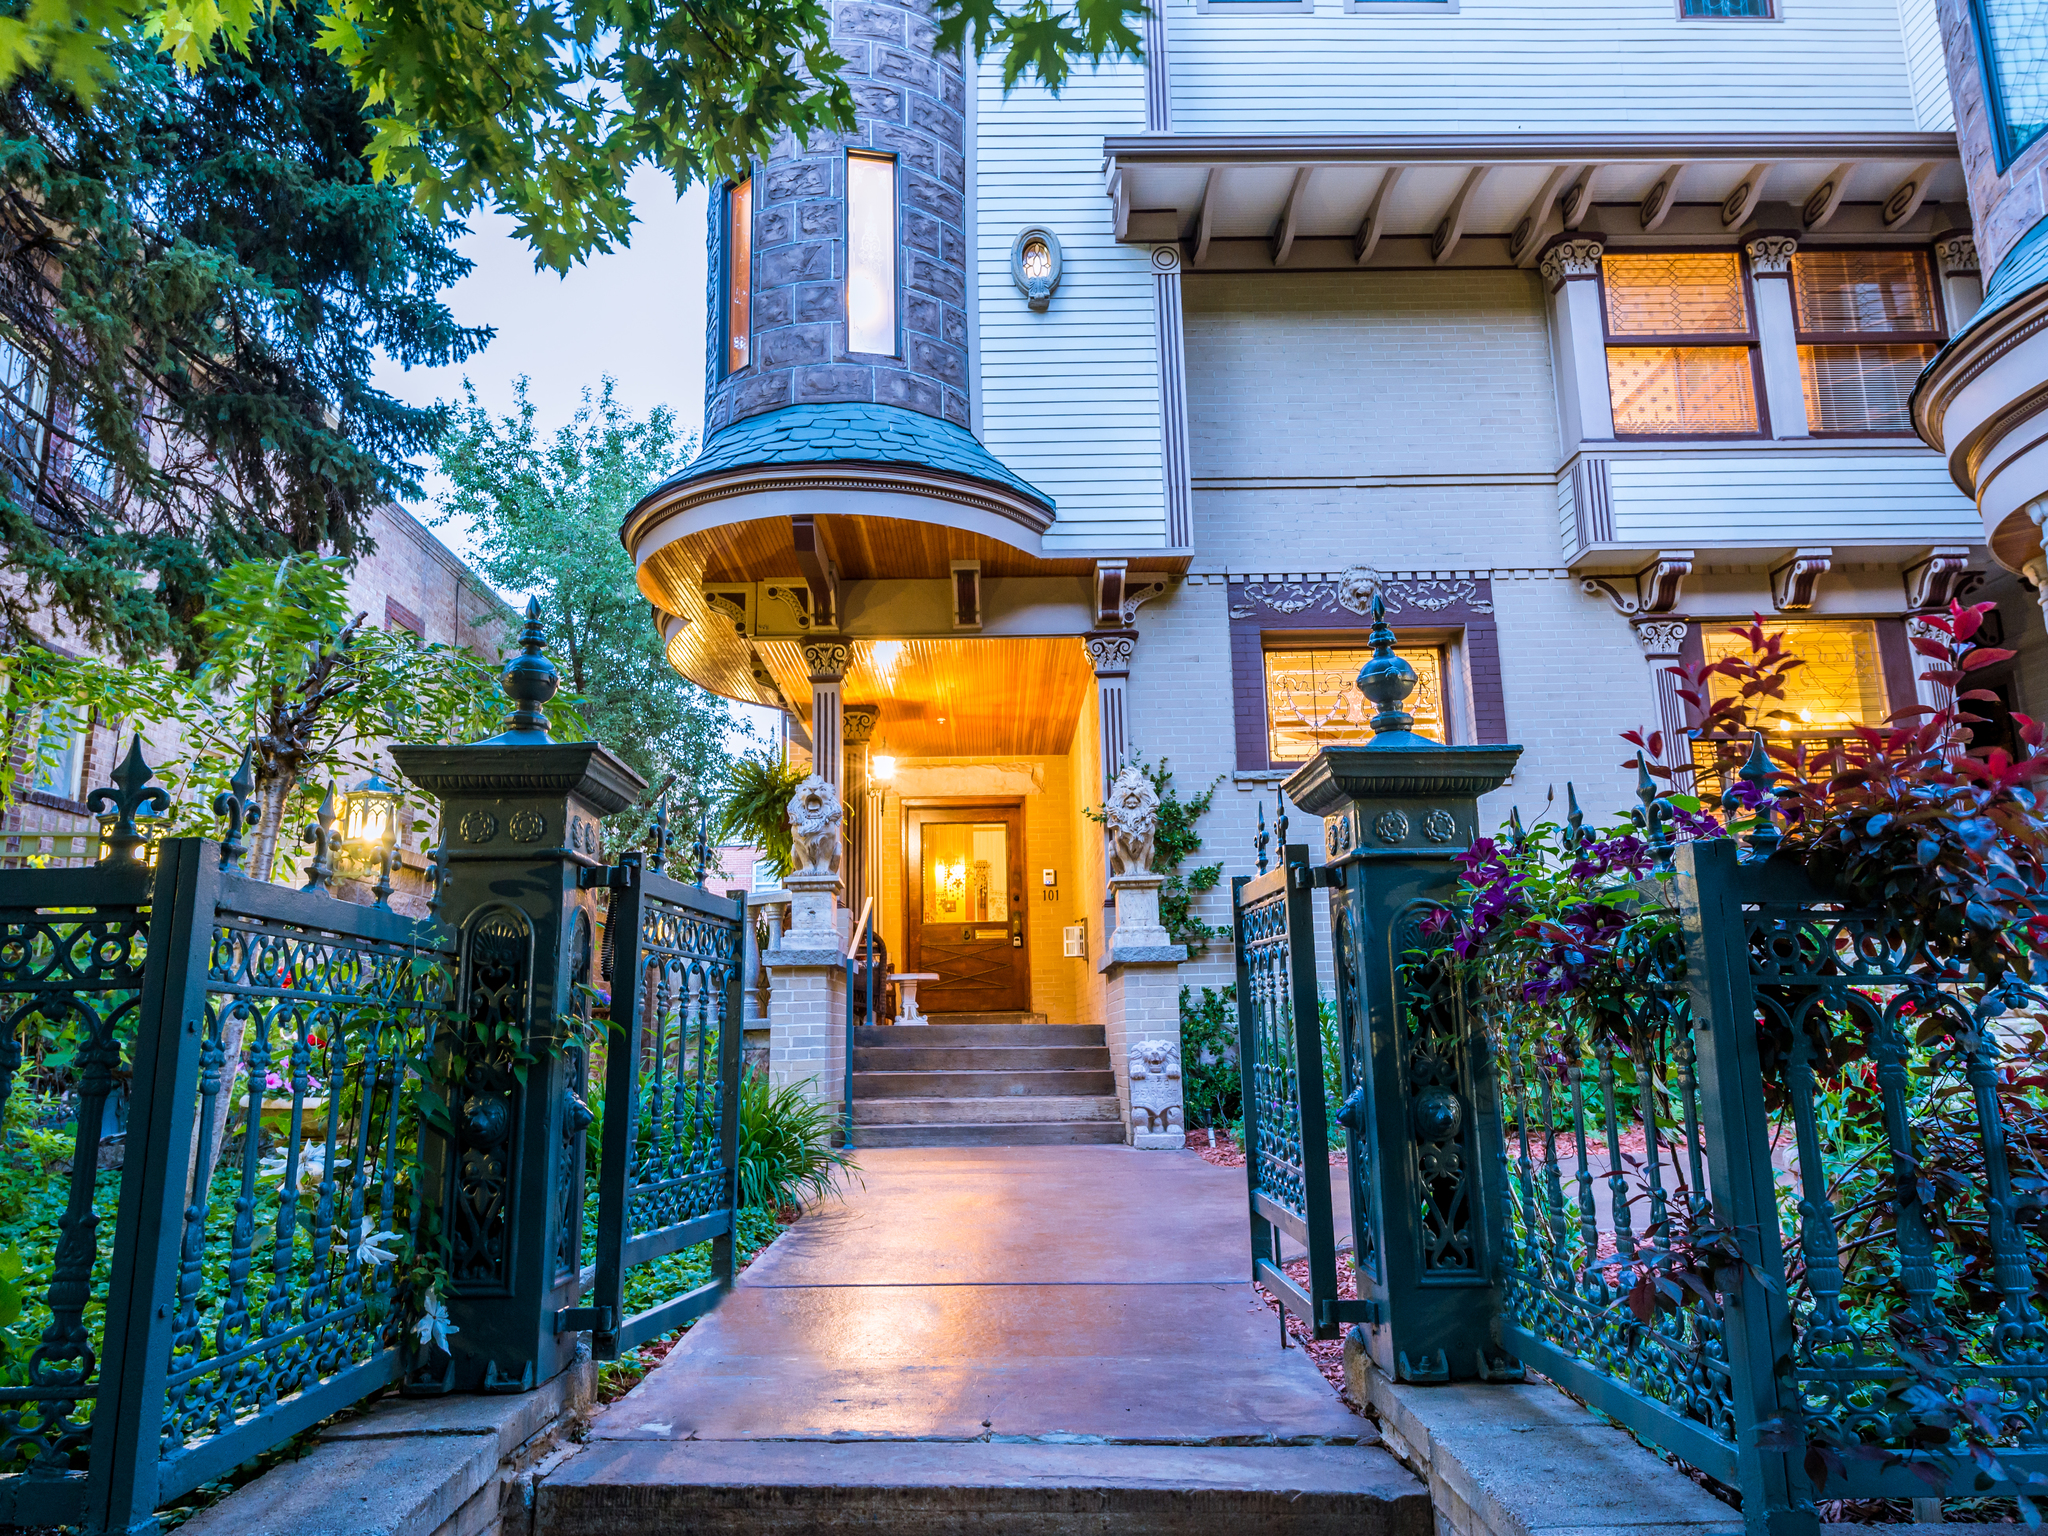 Residence No.101 located at 1022 Pearl Street in Capitol Hill, Denver. Listed by LIV Sotheby’s International Realty for $1,100,000.